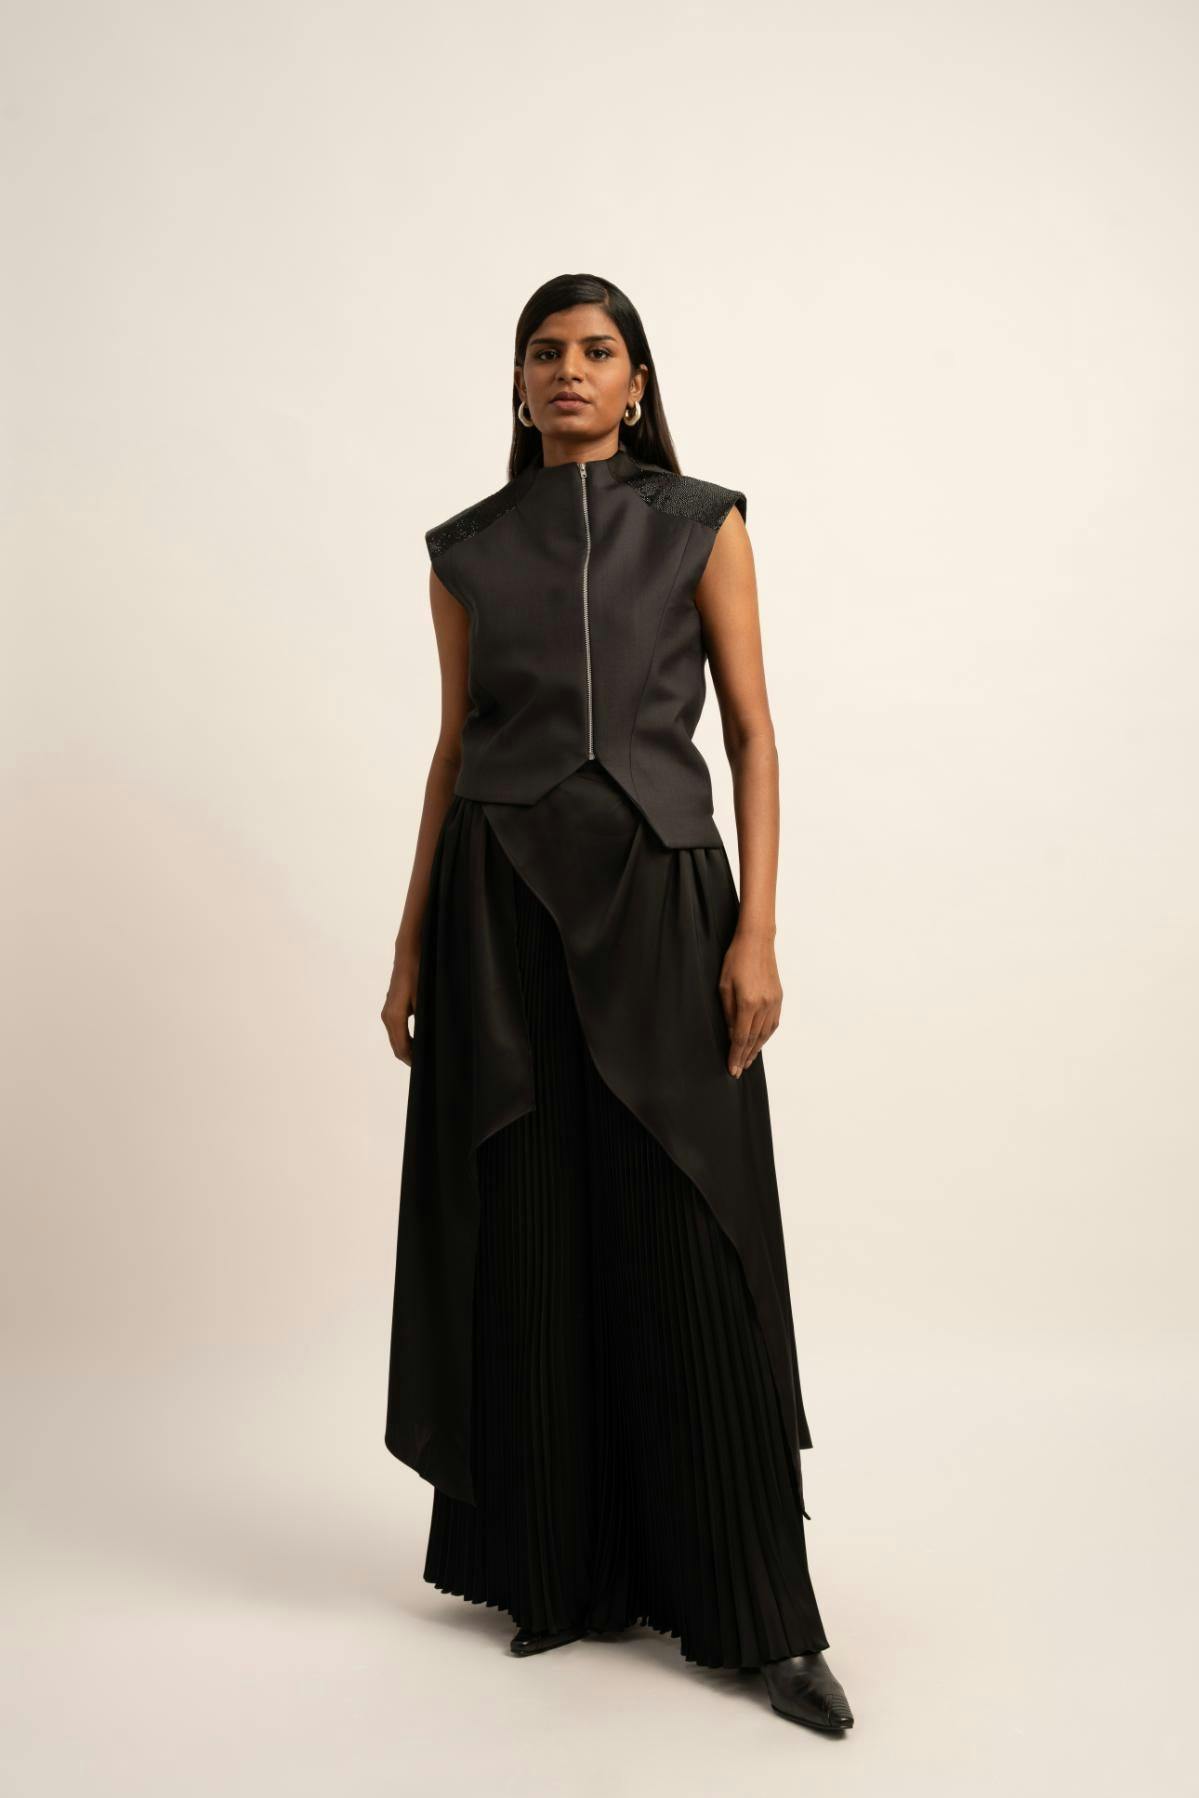 The Seraphic Symphony Jacket, a product by Siddhant Agrawal Label